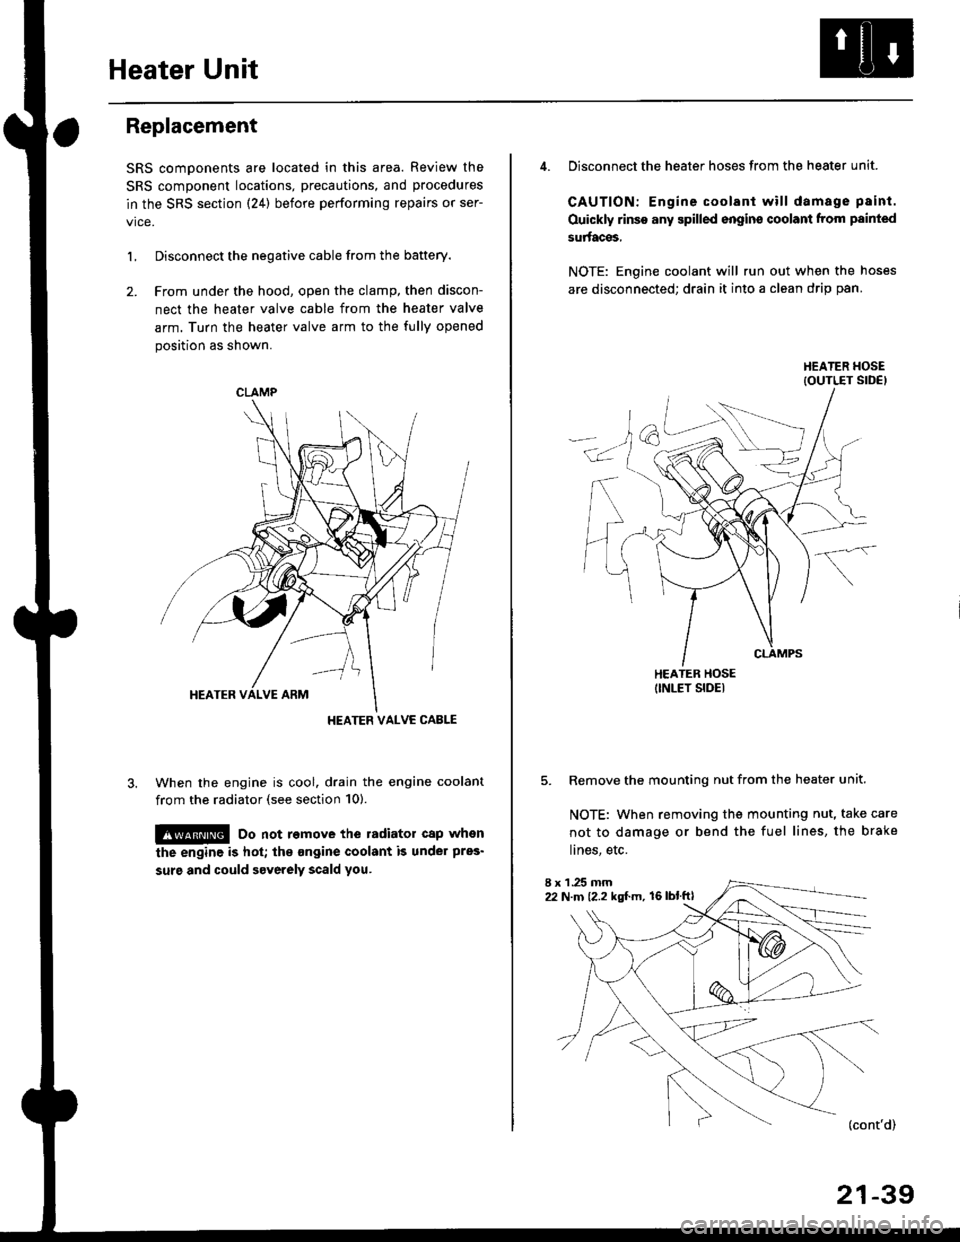 HONDA CIVIC 1996 6.G Manual PDF Heater Unit
Replacement
SRS components are located in this area. Review the
SRS component locations, precautions, and procedures
in the SRS section {24} before performing repairs or ser-
L Disconnect 